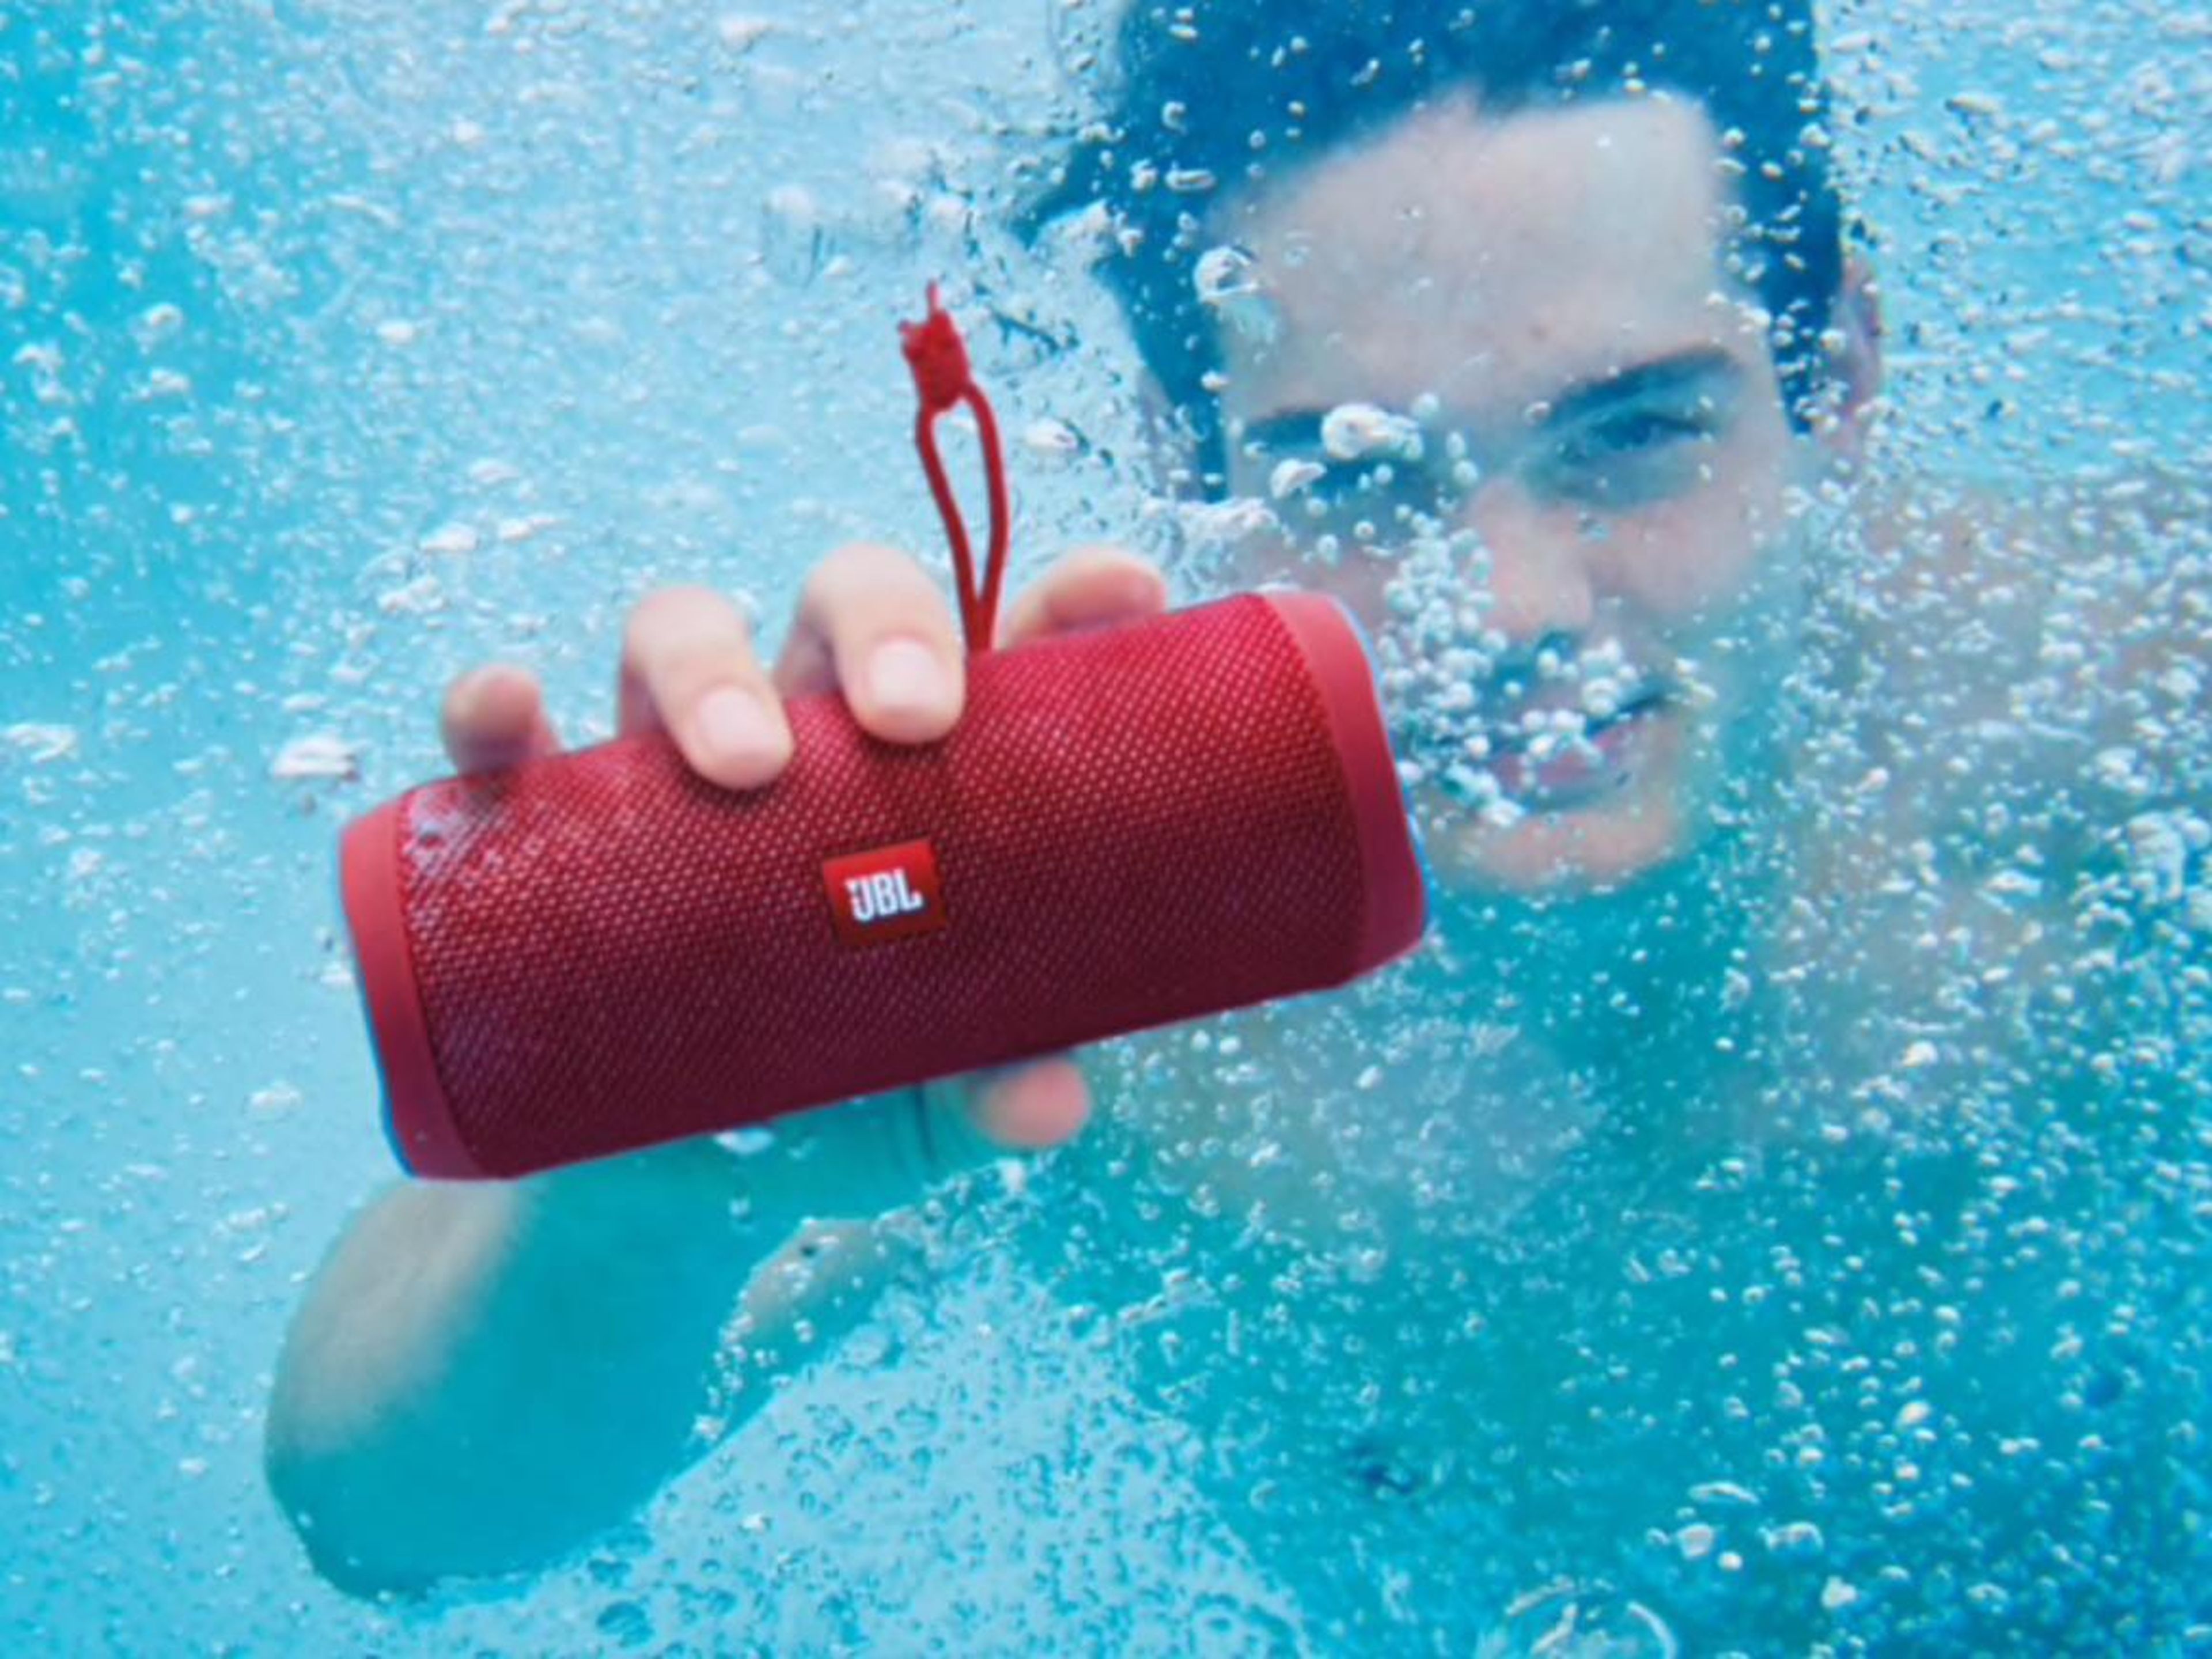 A splashproof portable Bluetooth speaker for messy college events that call for music